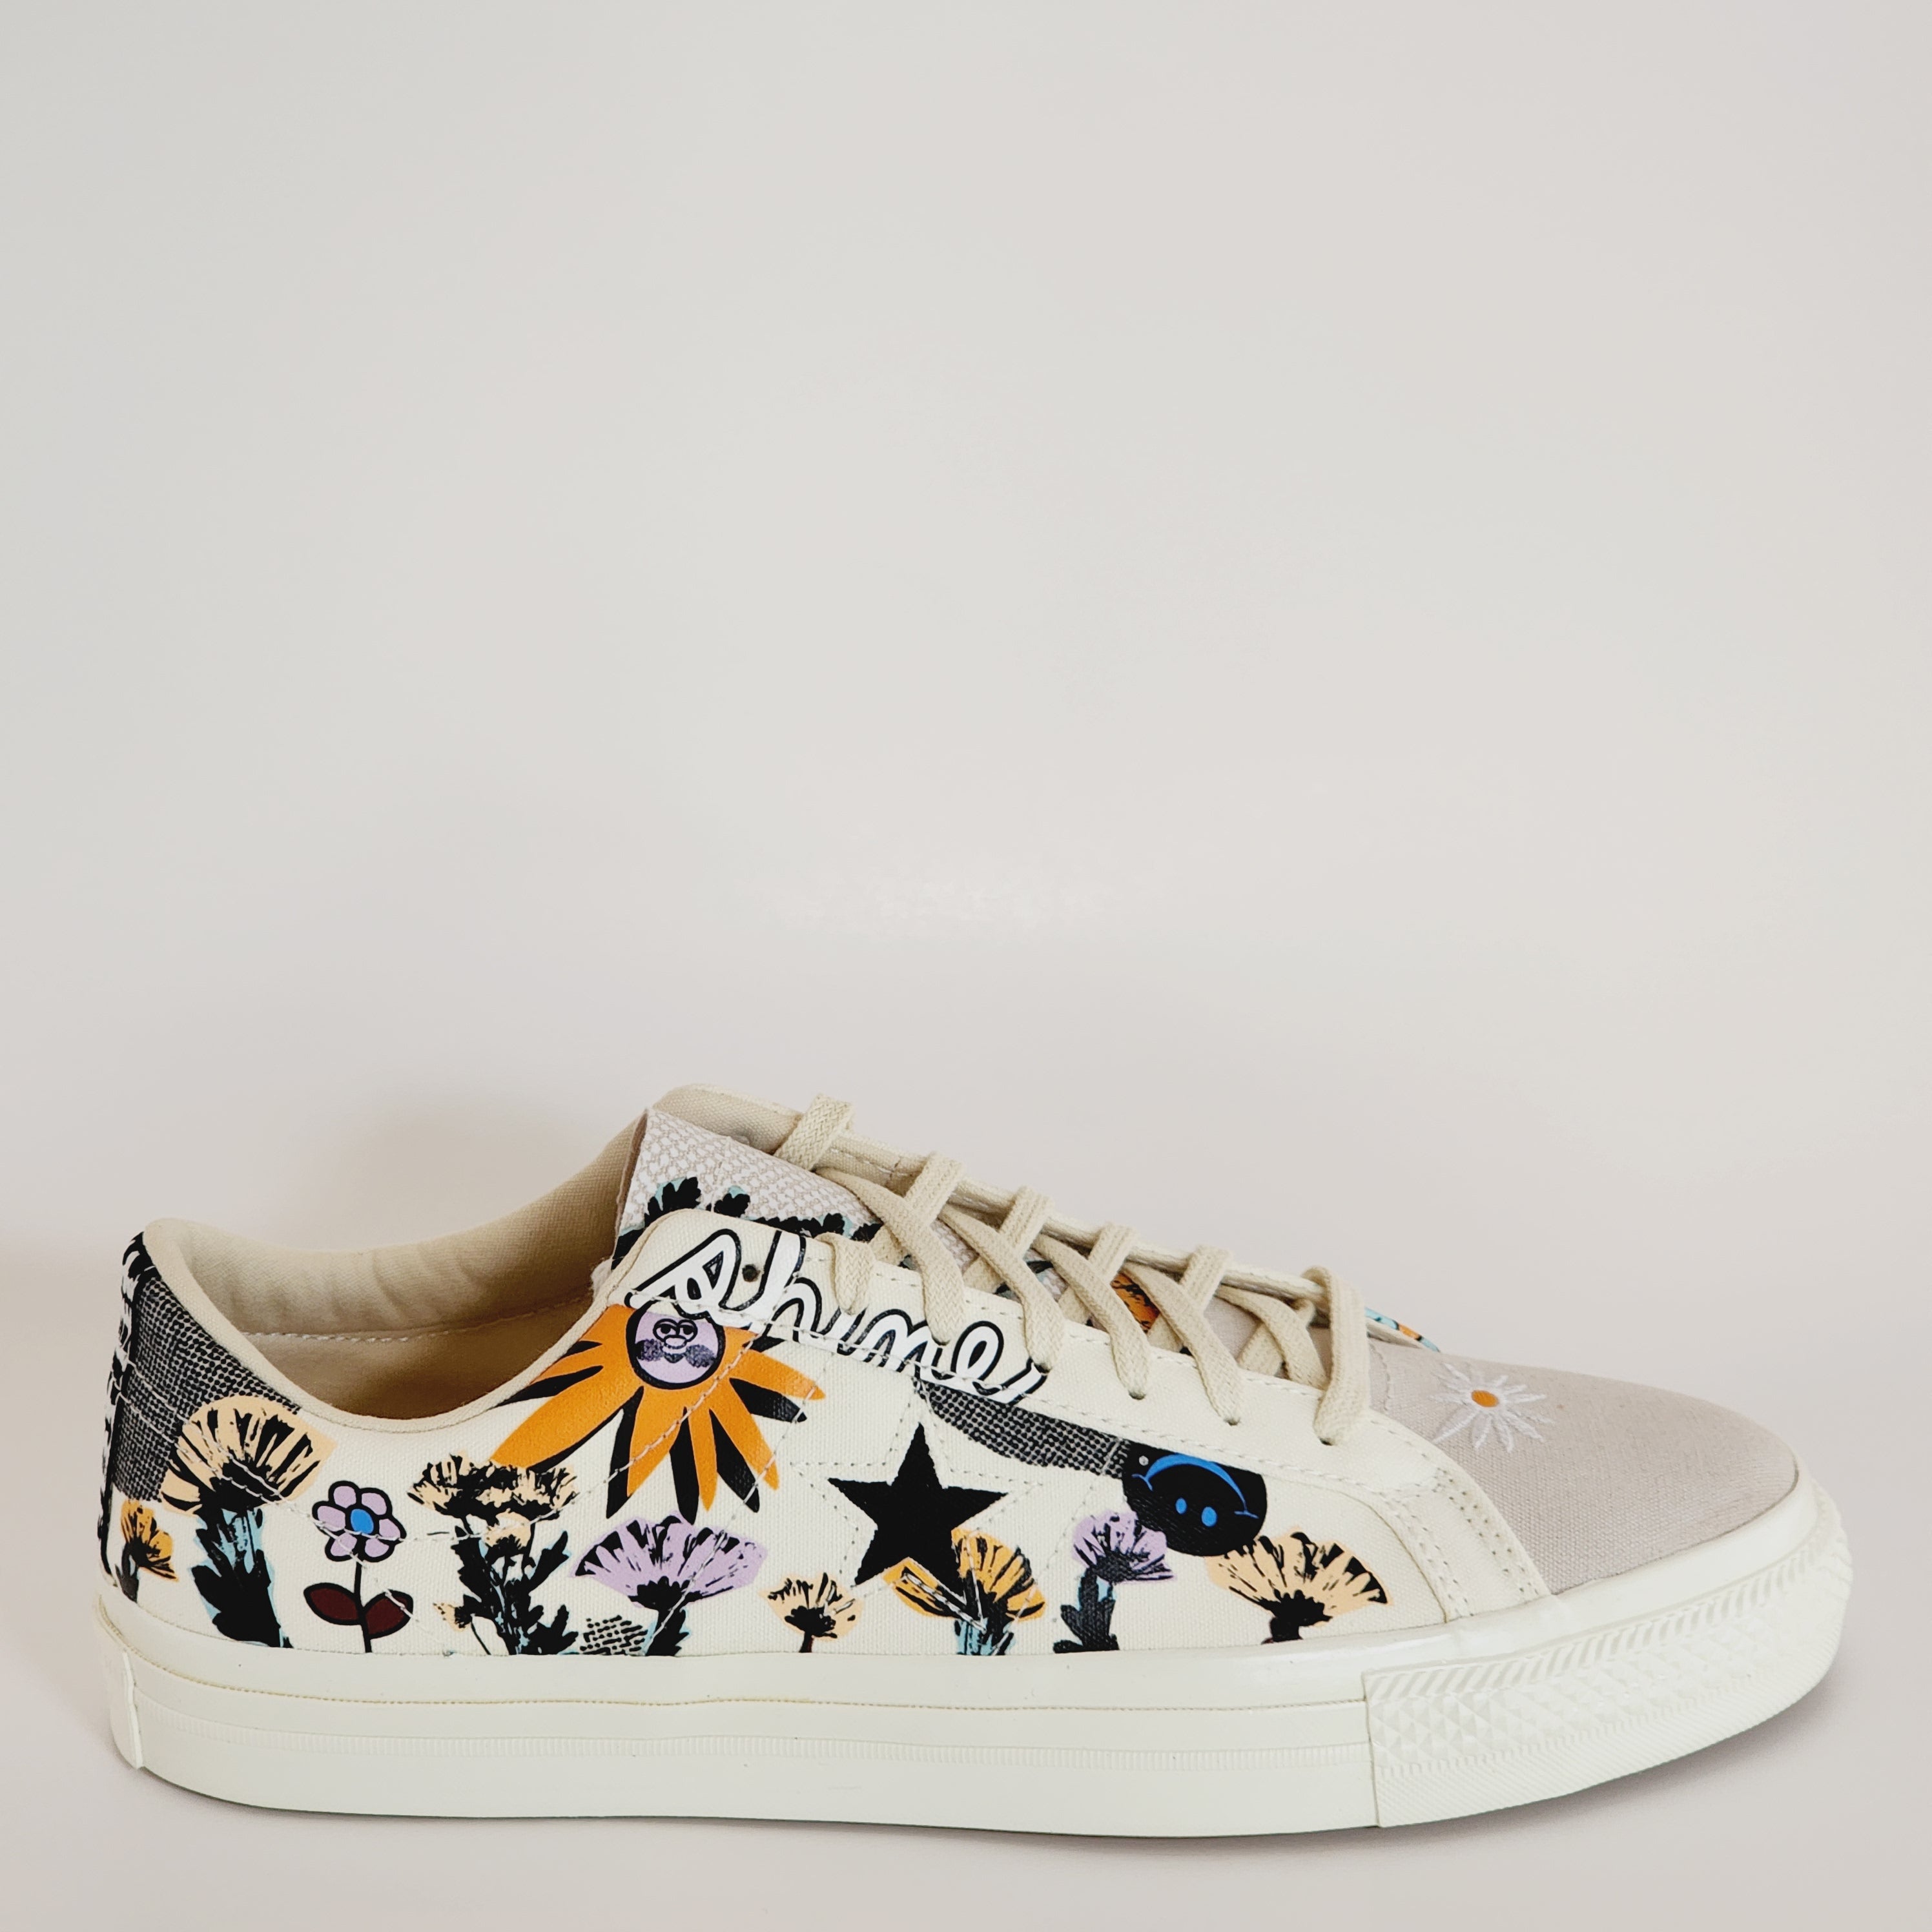 Converse One Star Pro Ox 'Floral Much Love' Unisex Sneakers 172933C NWT